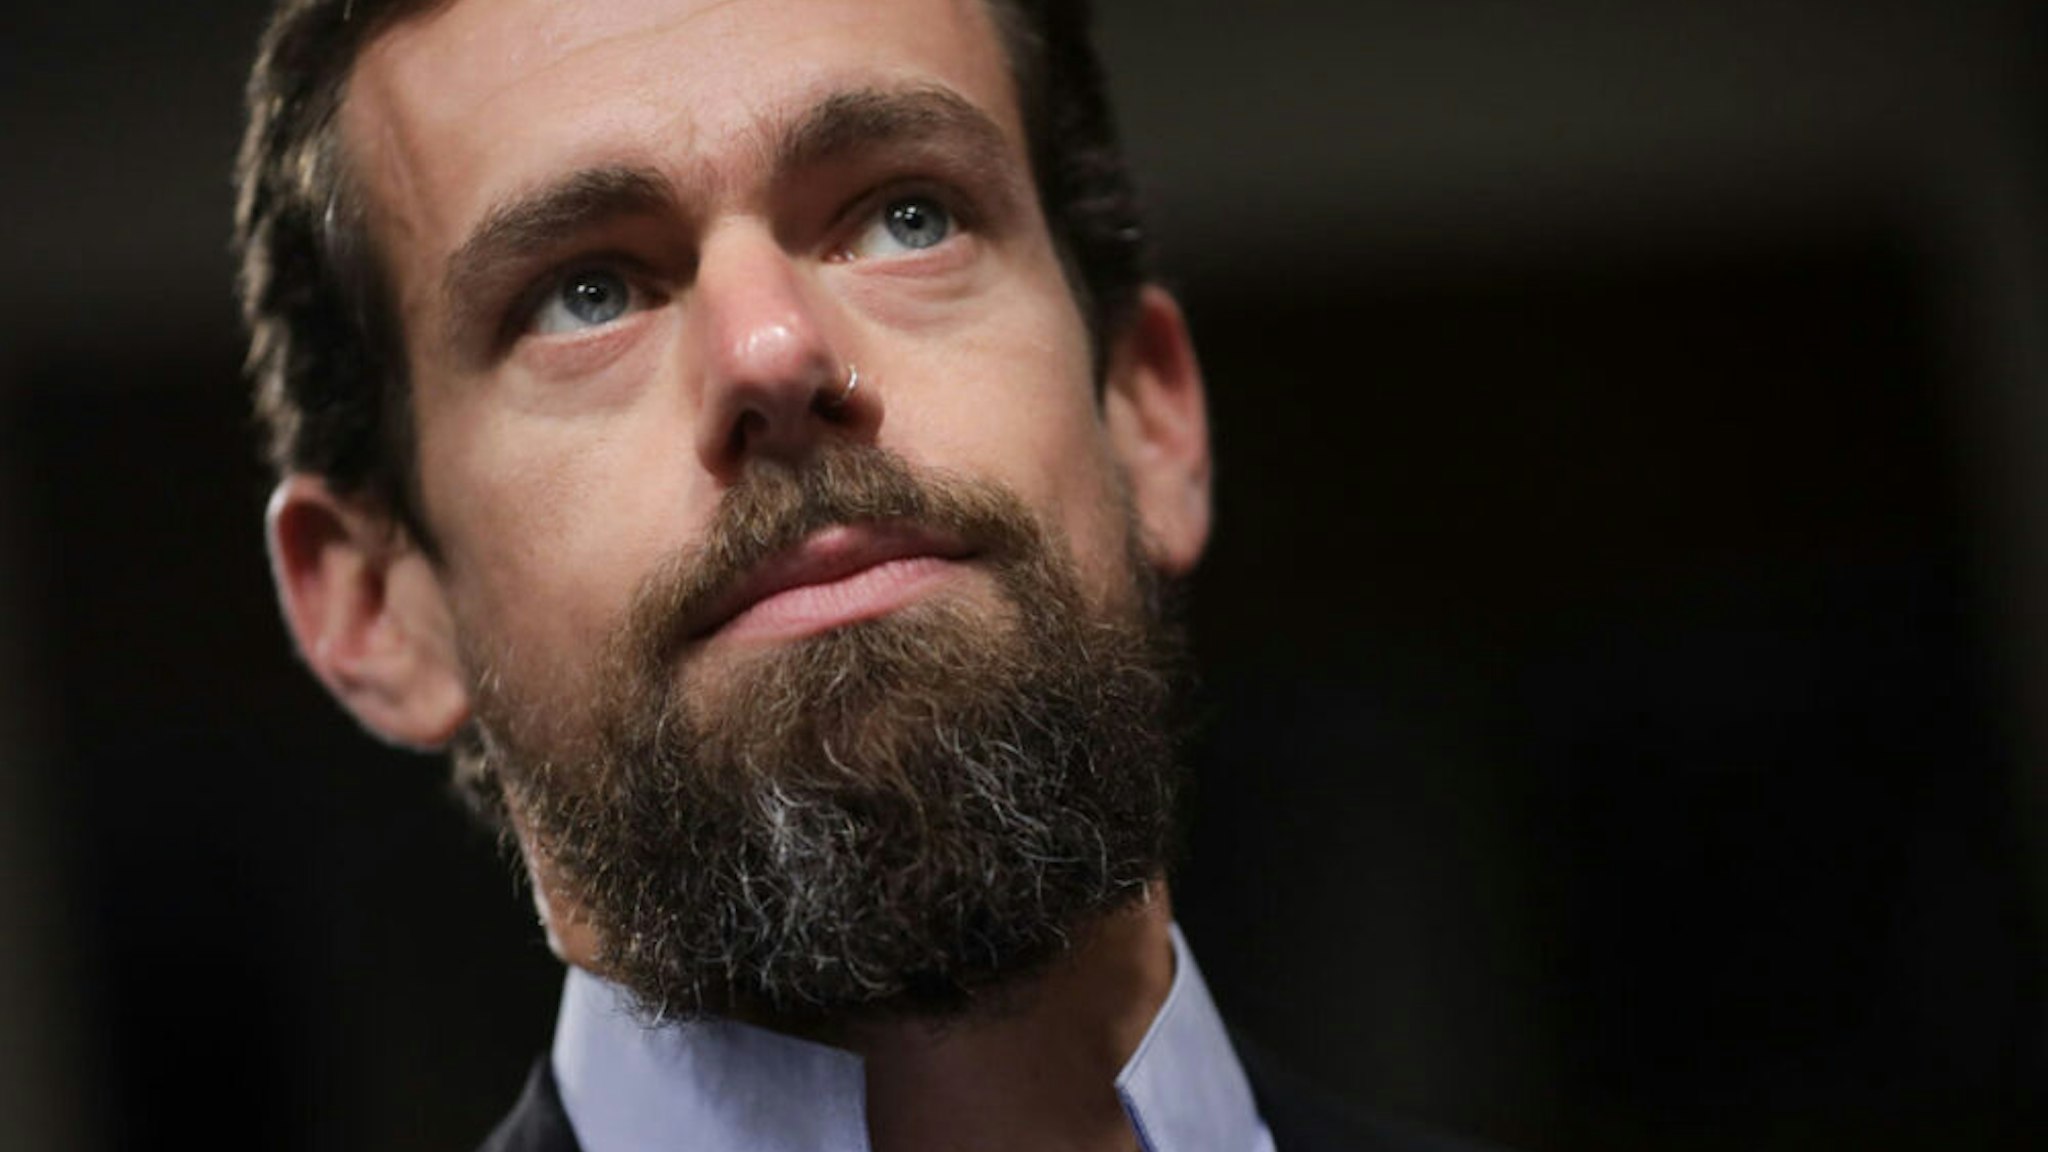 WASHINGTON, DC - SEPTEMBER 5: Twitter chief executive officer Jack Dorsey looks on during a Senate Intelligence Committee hearing concerning foreign influence operations' use of social media platforms, on Capitol Hill, September 5, 2018 in Washington, DC. Twitter CEO Jack Dorsey and Facebook chief operating officer Sheryl Sandberg faced questions about how foreign operatives use their platforms in attempts to influence and manipulate public opinion.